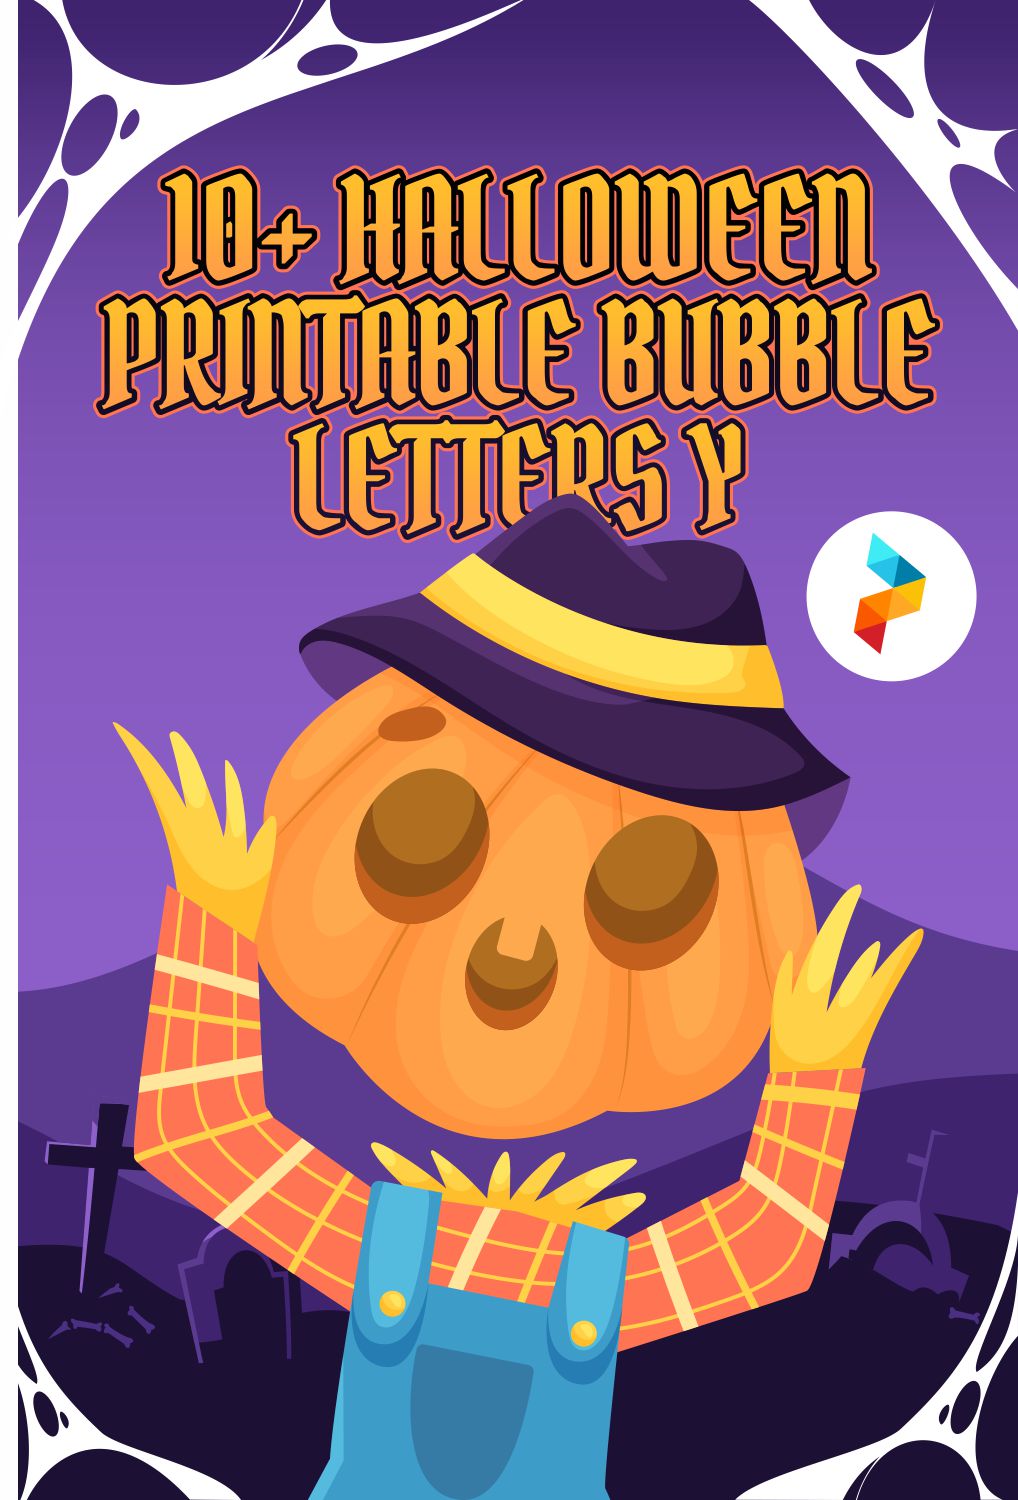 Halloween Printable Bubble Letters Y